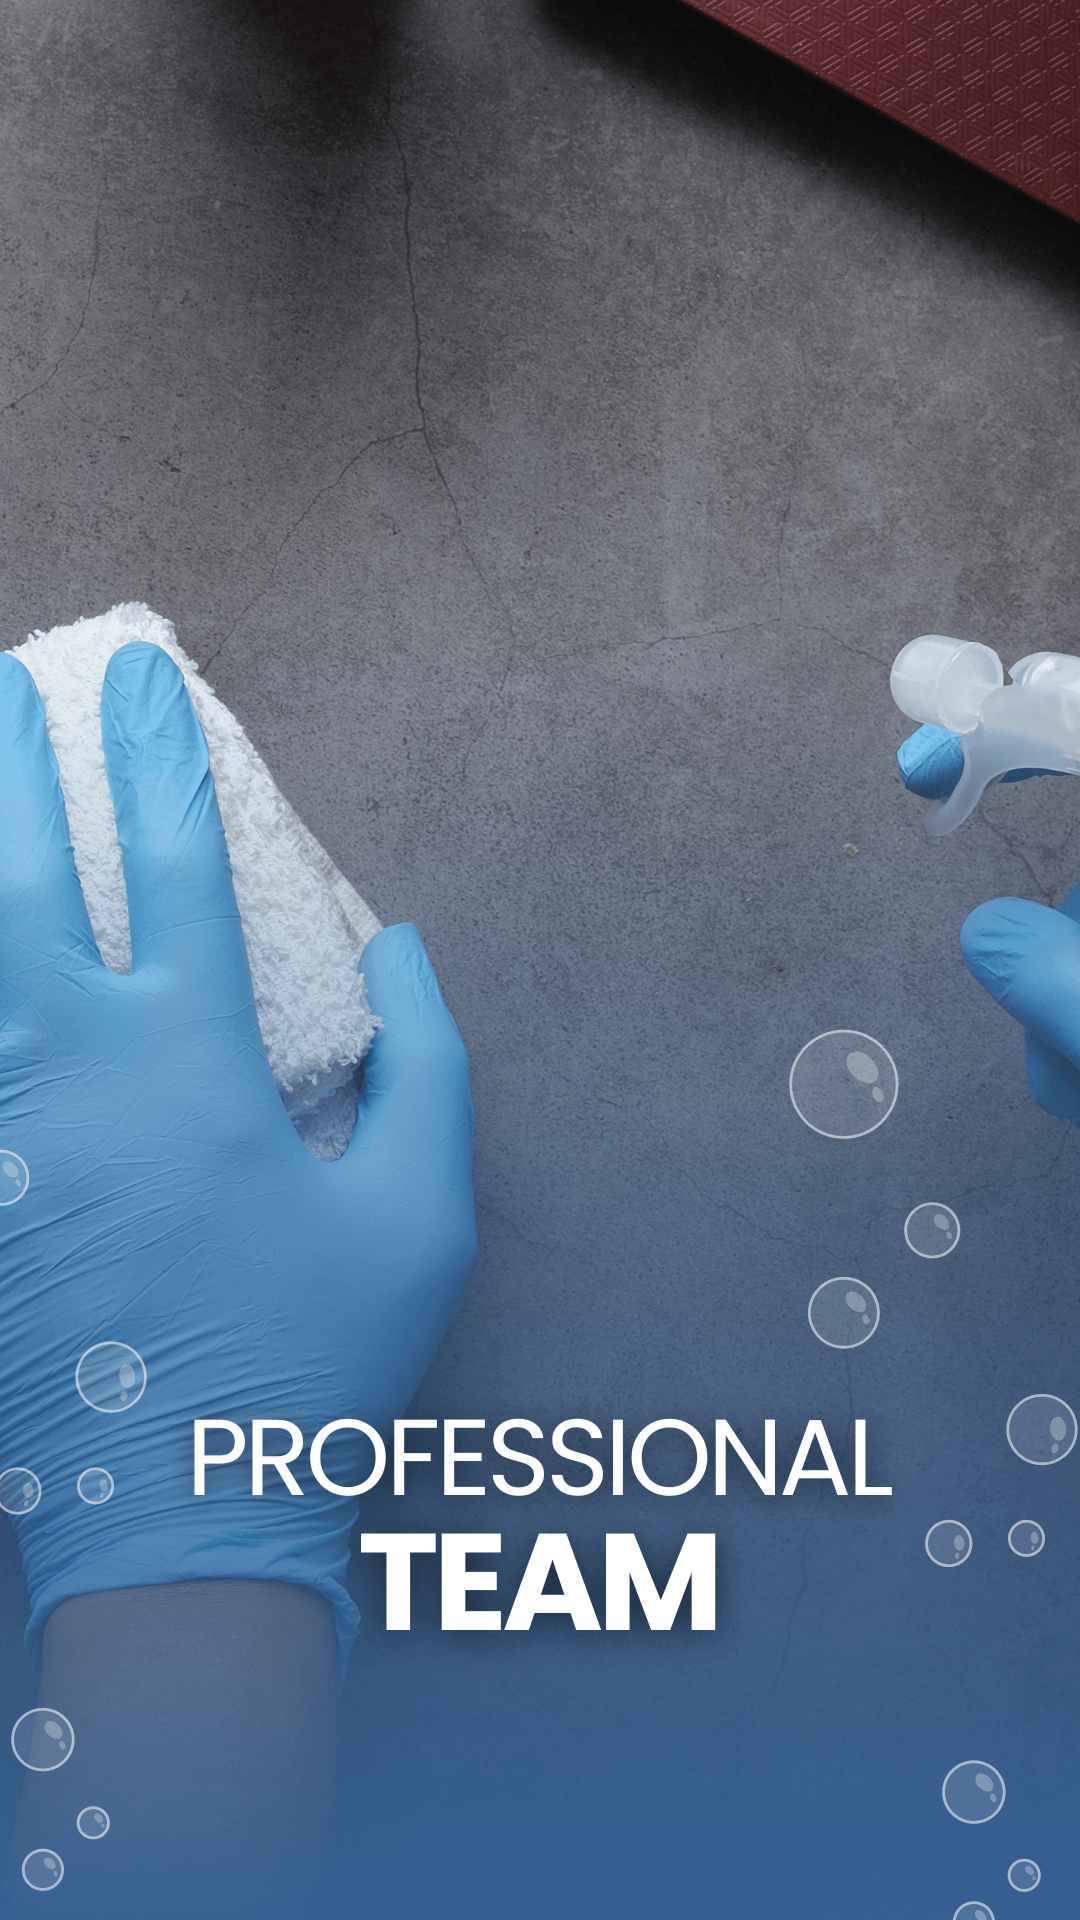 Professional Team - JPR Cleaning - Commercial Cleaning Services